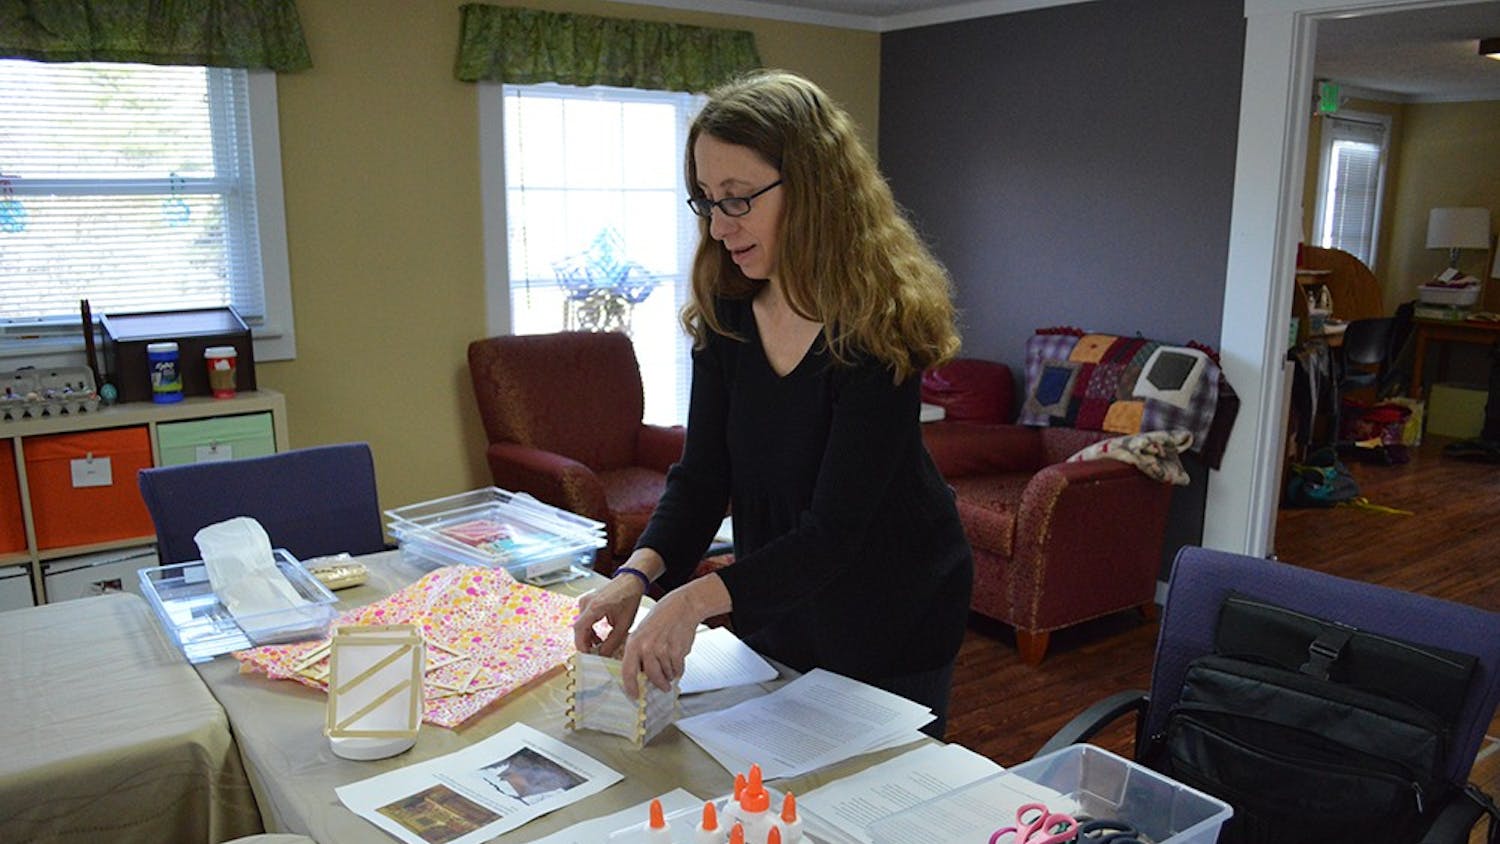 Art therapist Paula Worley assembles a popsicle stick lantern as a demonstration for the art therapy session Thursday morning at the Better Day Club. The club is an adult day center for individuals suffering from cognitive changes due to aging, Alzheimer's or other forms of dementia.